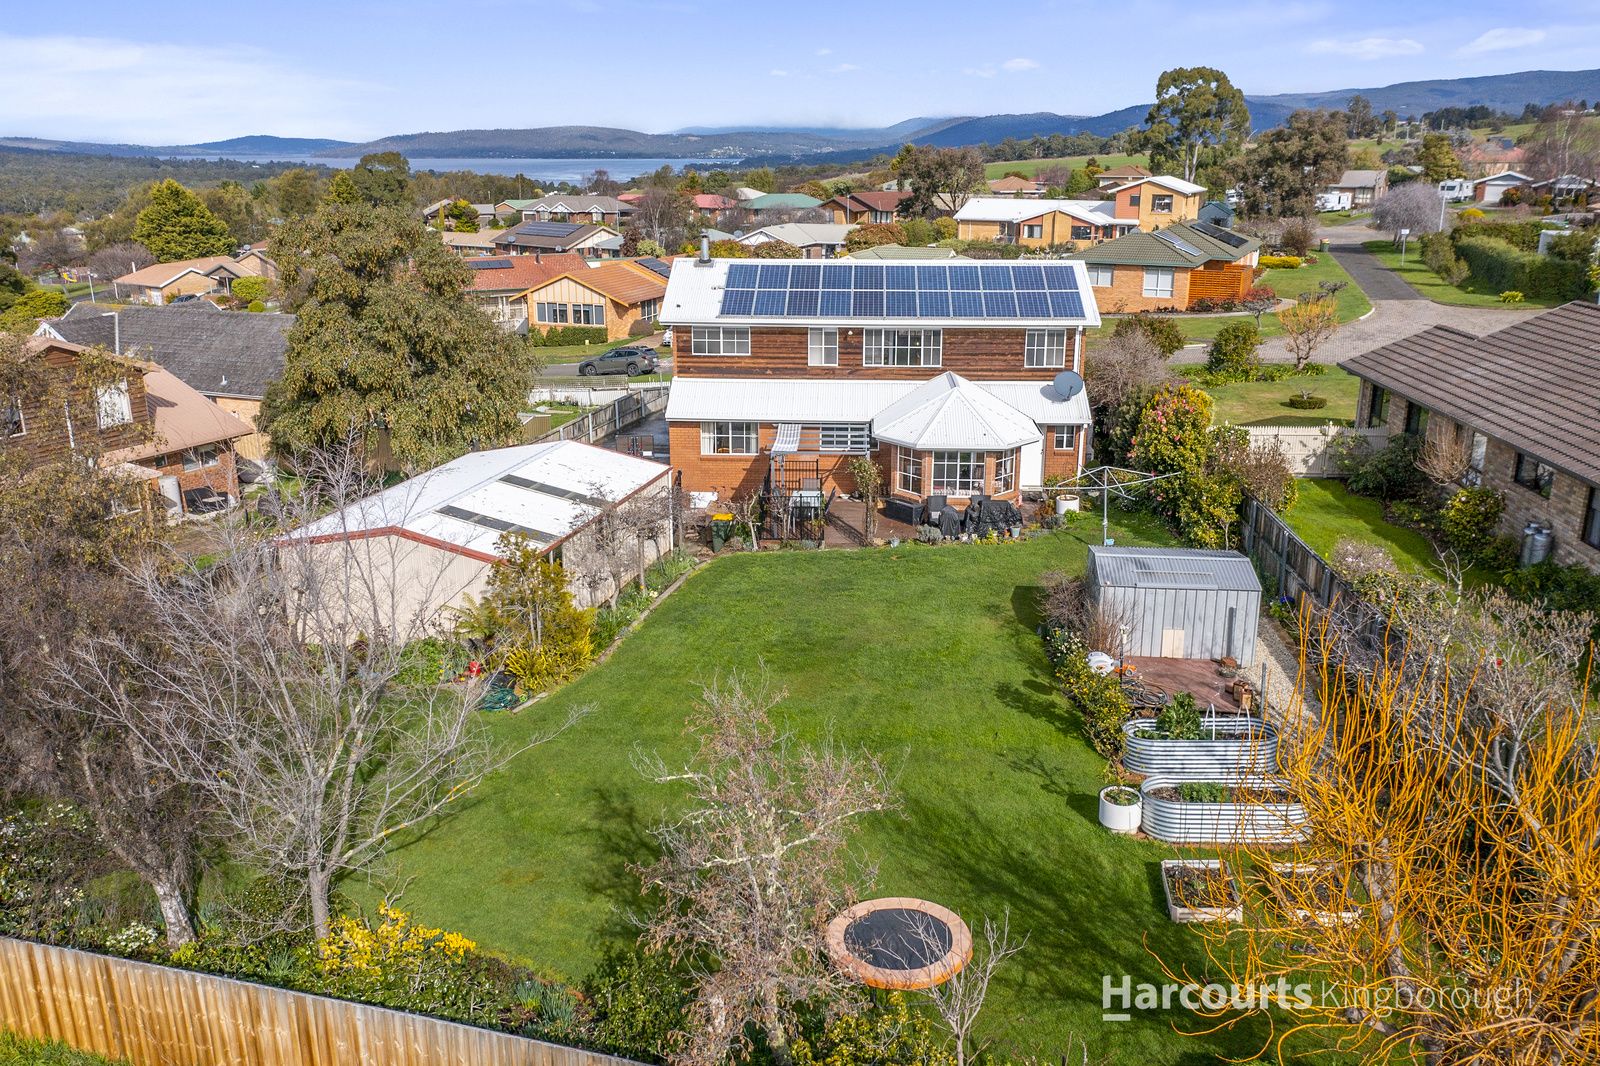 4 bedrooms House in 4 Prince Regent Place HUNTINGFIELD TAS, 7055